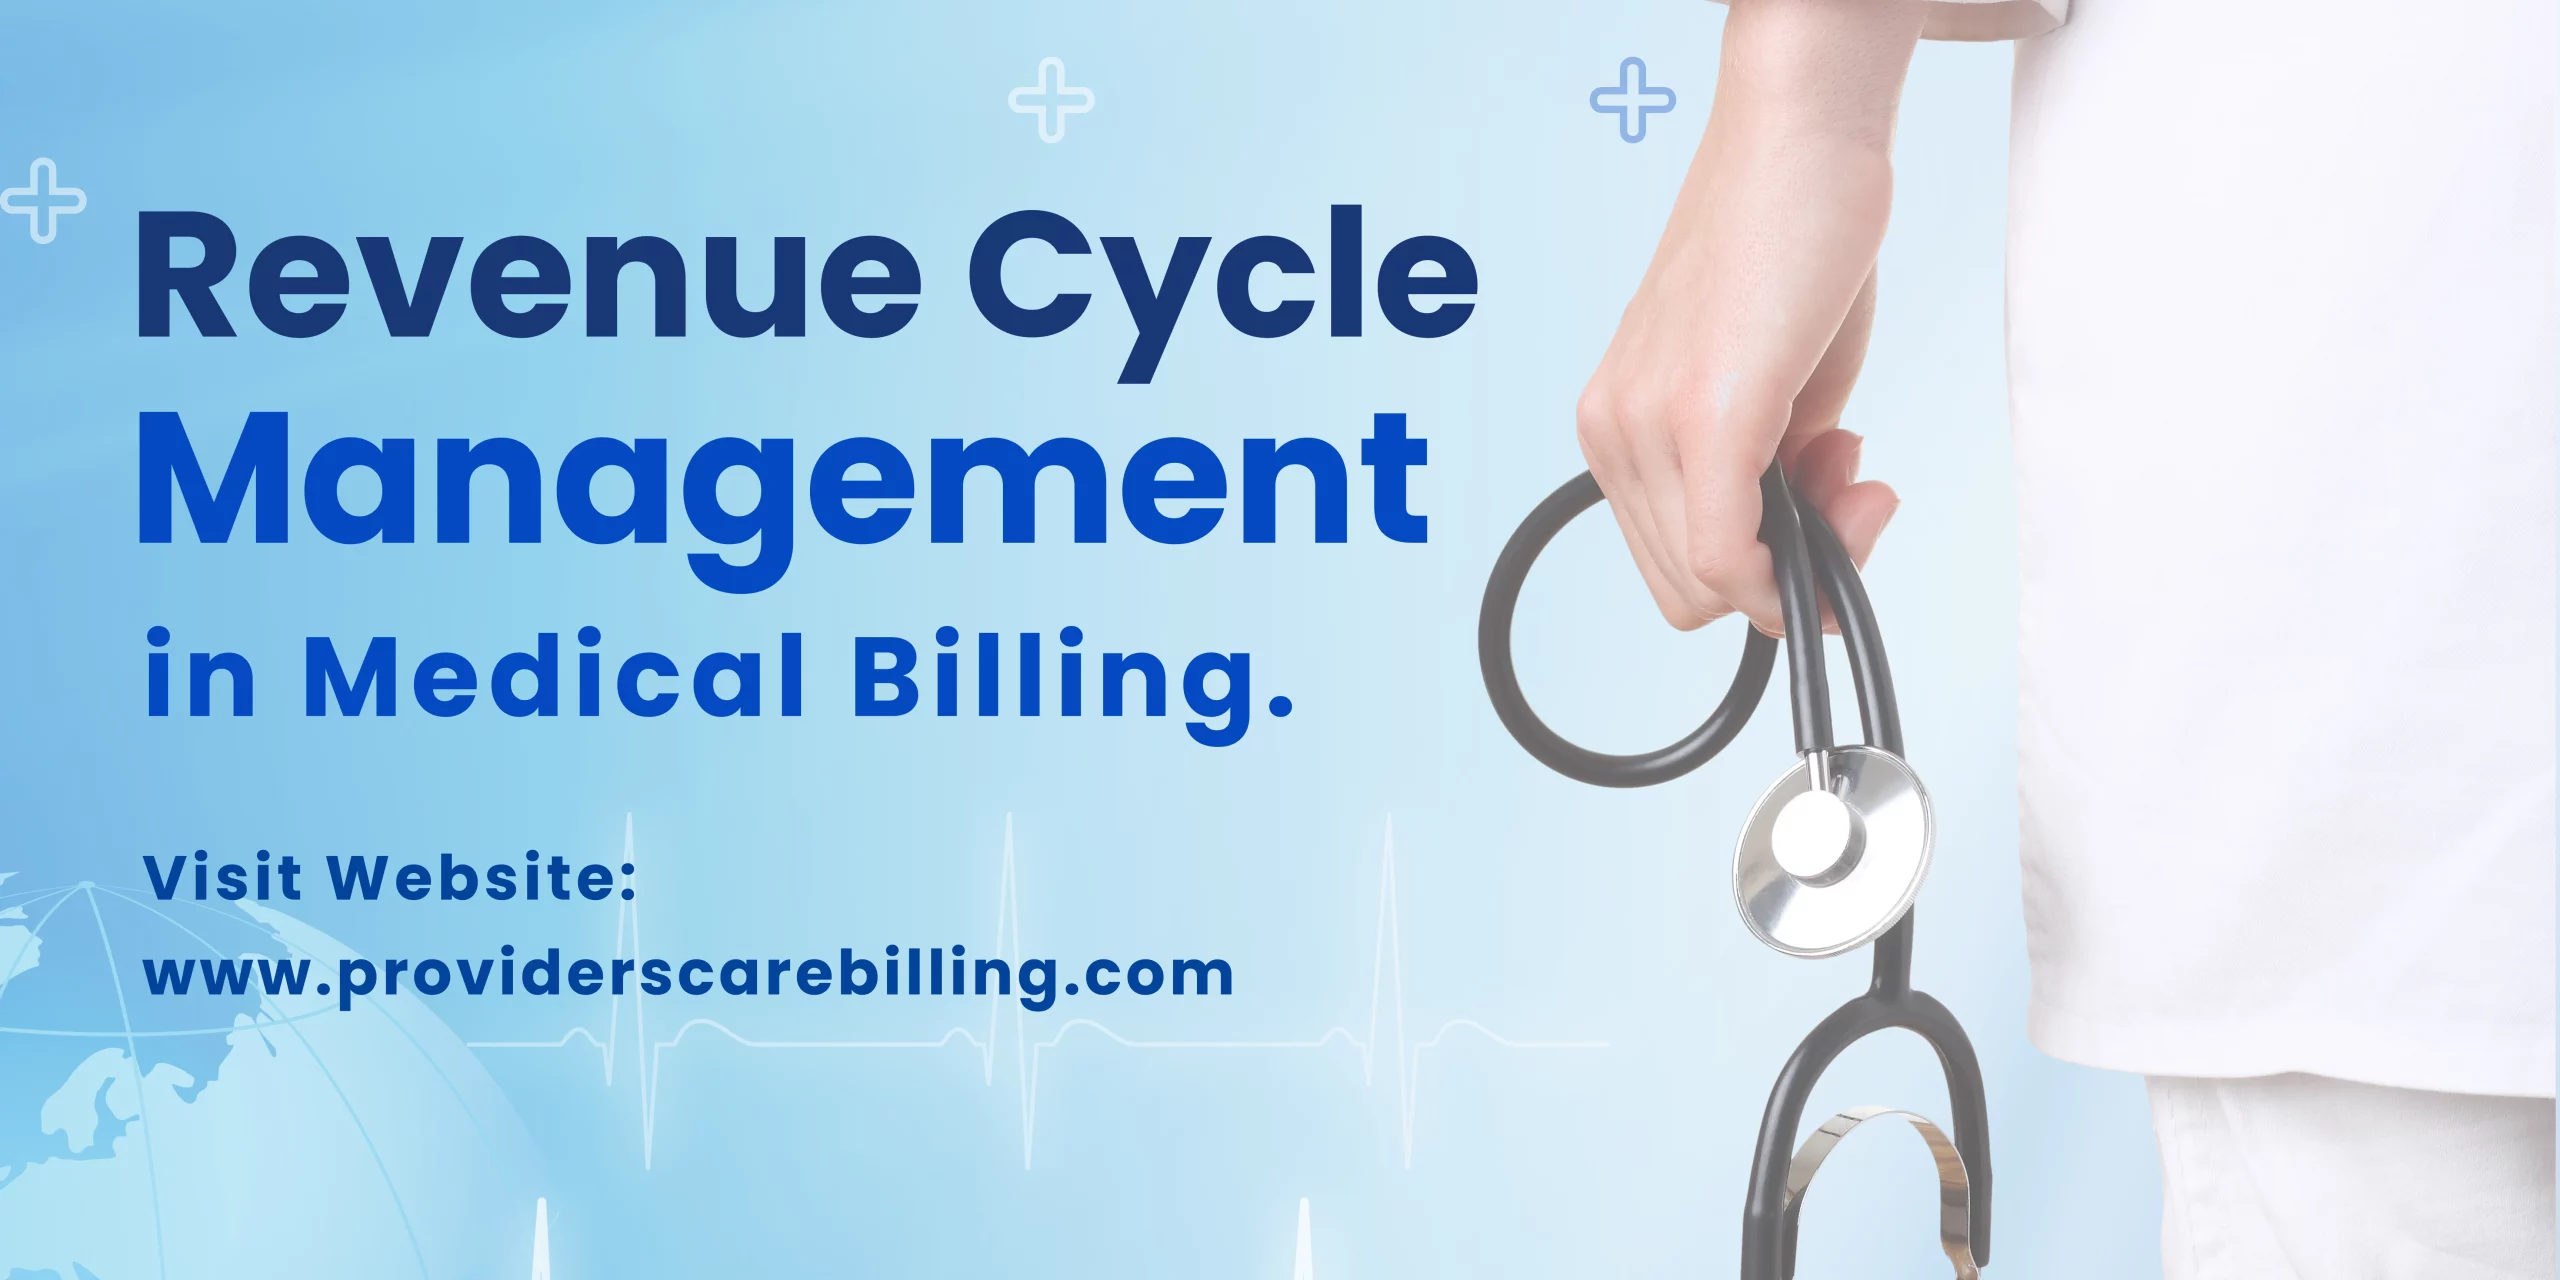 What is Revenue Cycle Management (RCM) in Medical Billing?